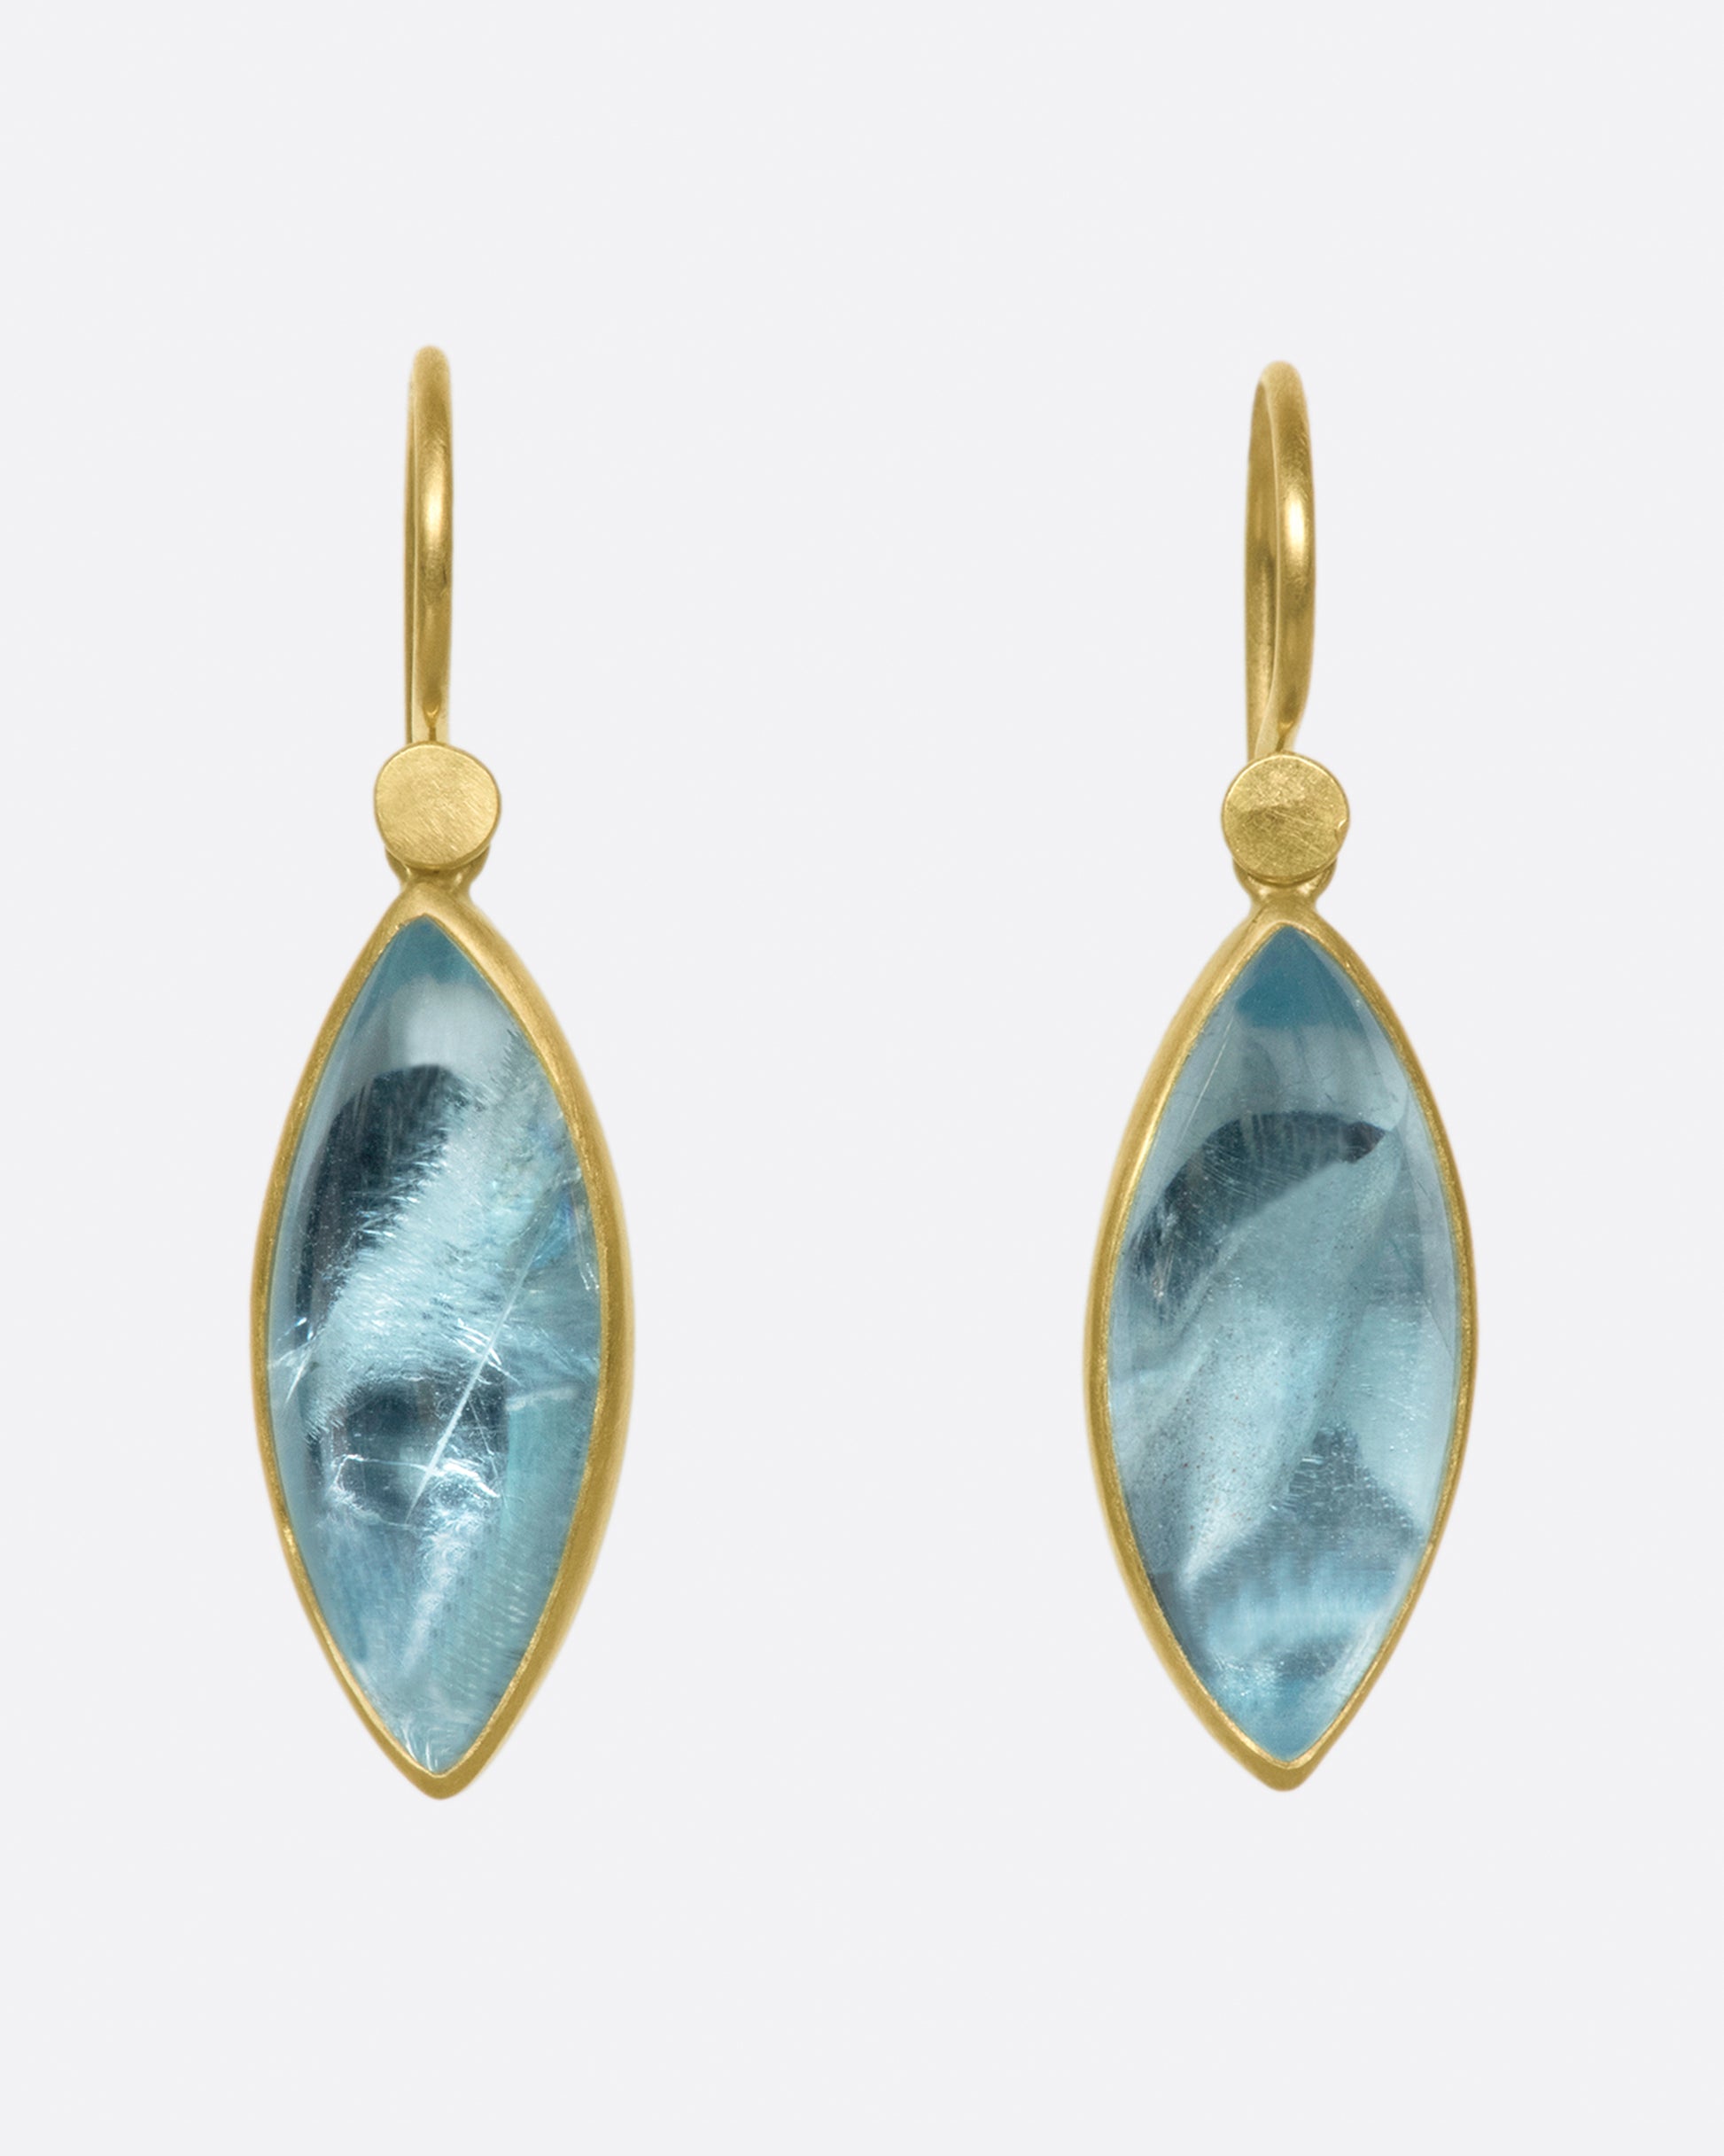 A pair of 18k gold dangling earrings with aquamarine navette drops.